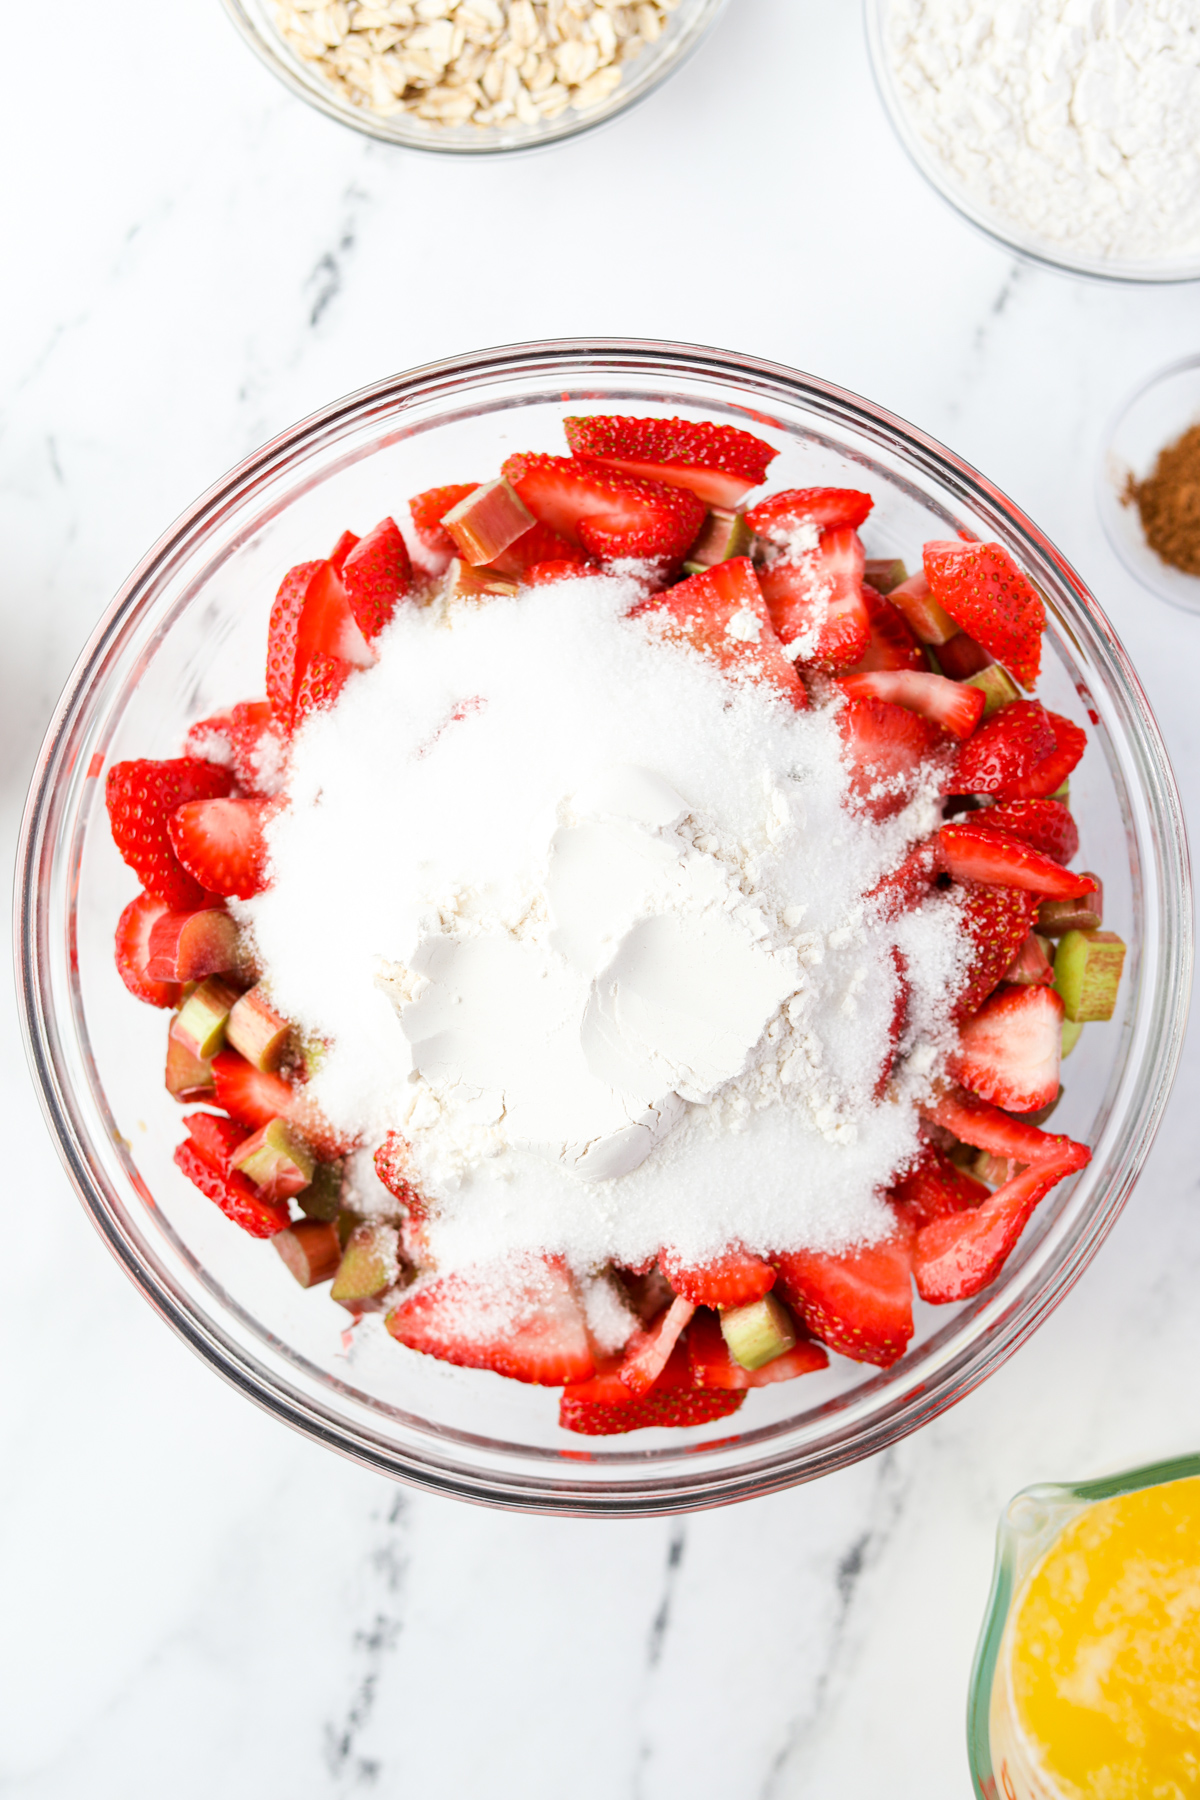 A bowl of strawberries and rhubarb with sugar.